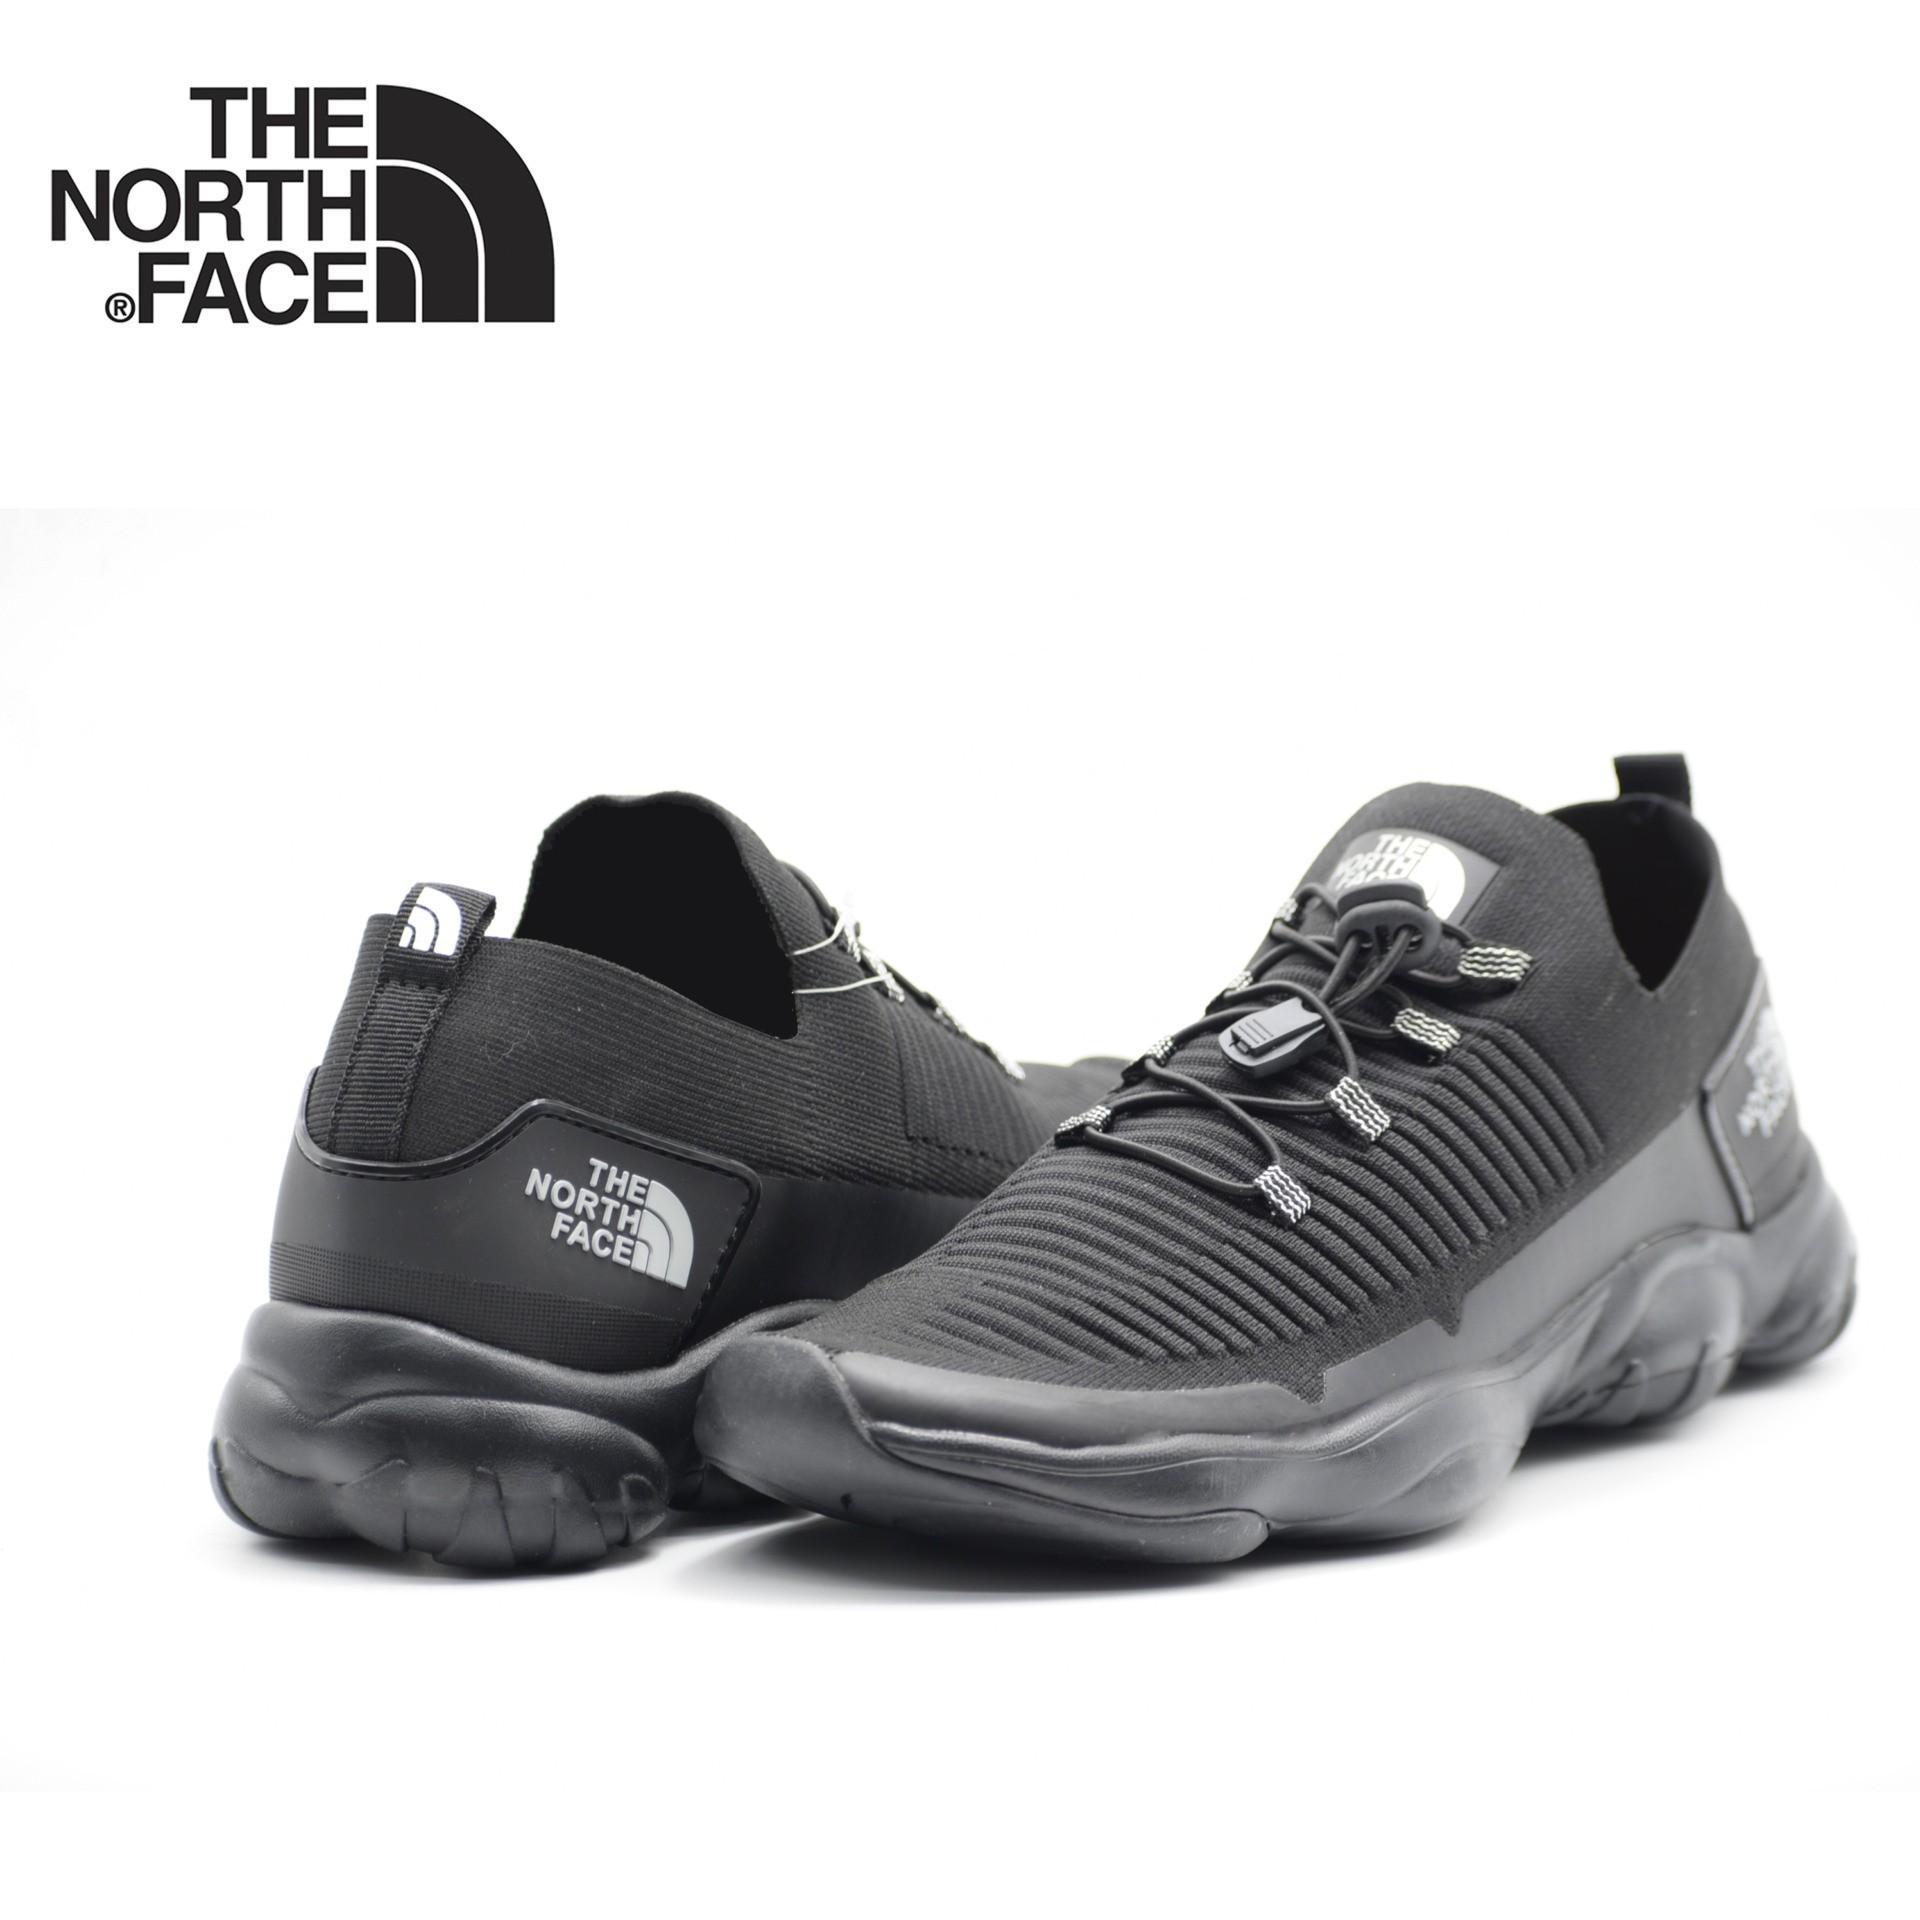 the-north-face-shoe.jpg